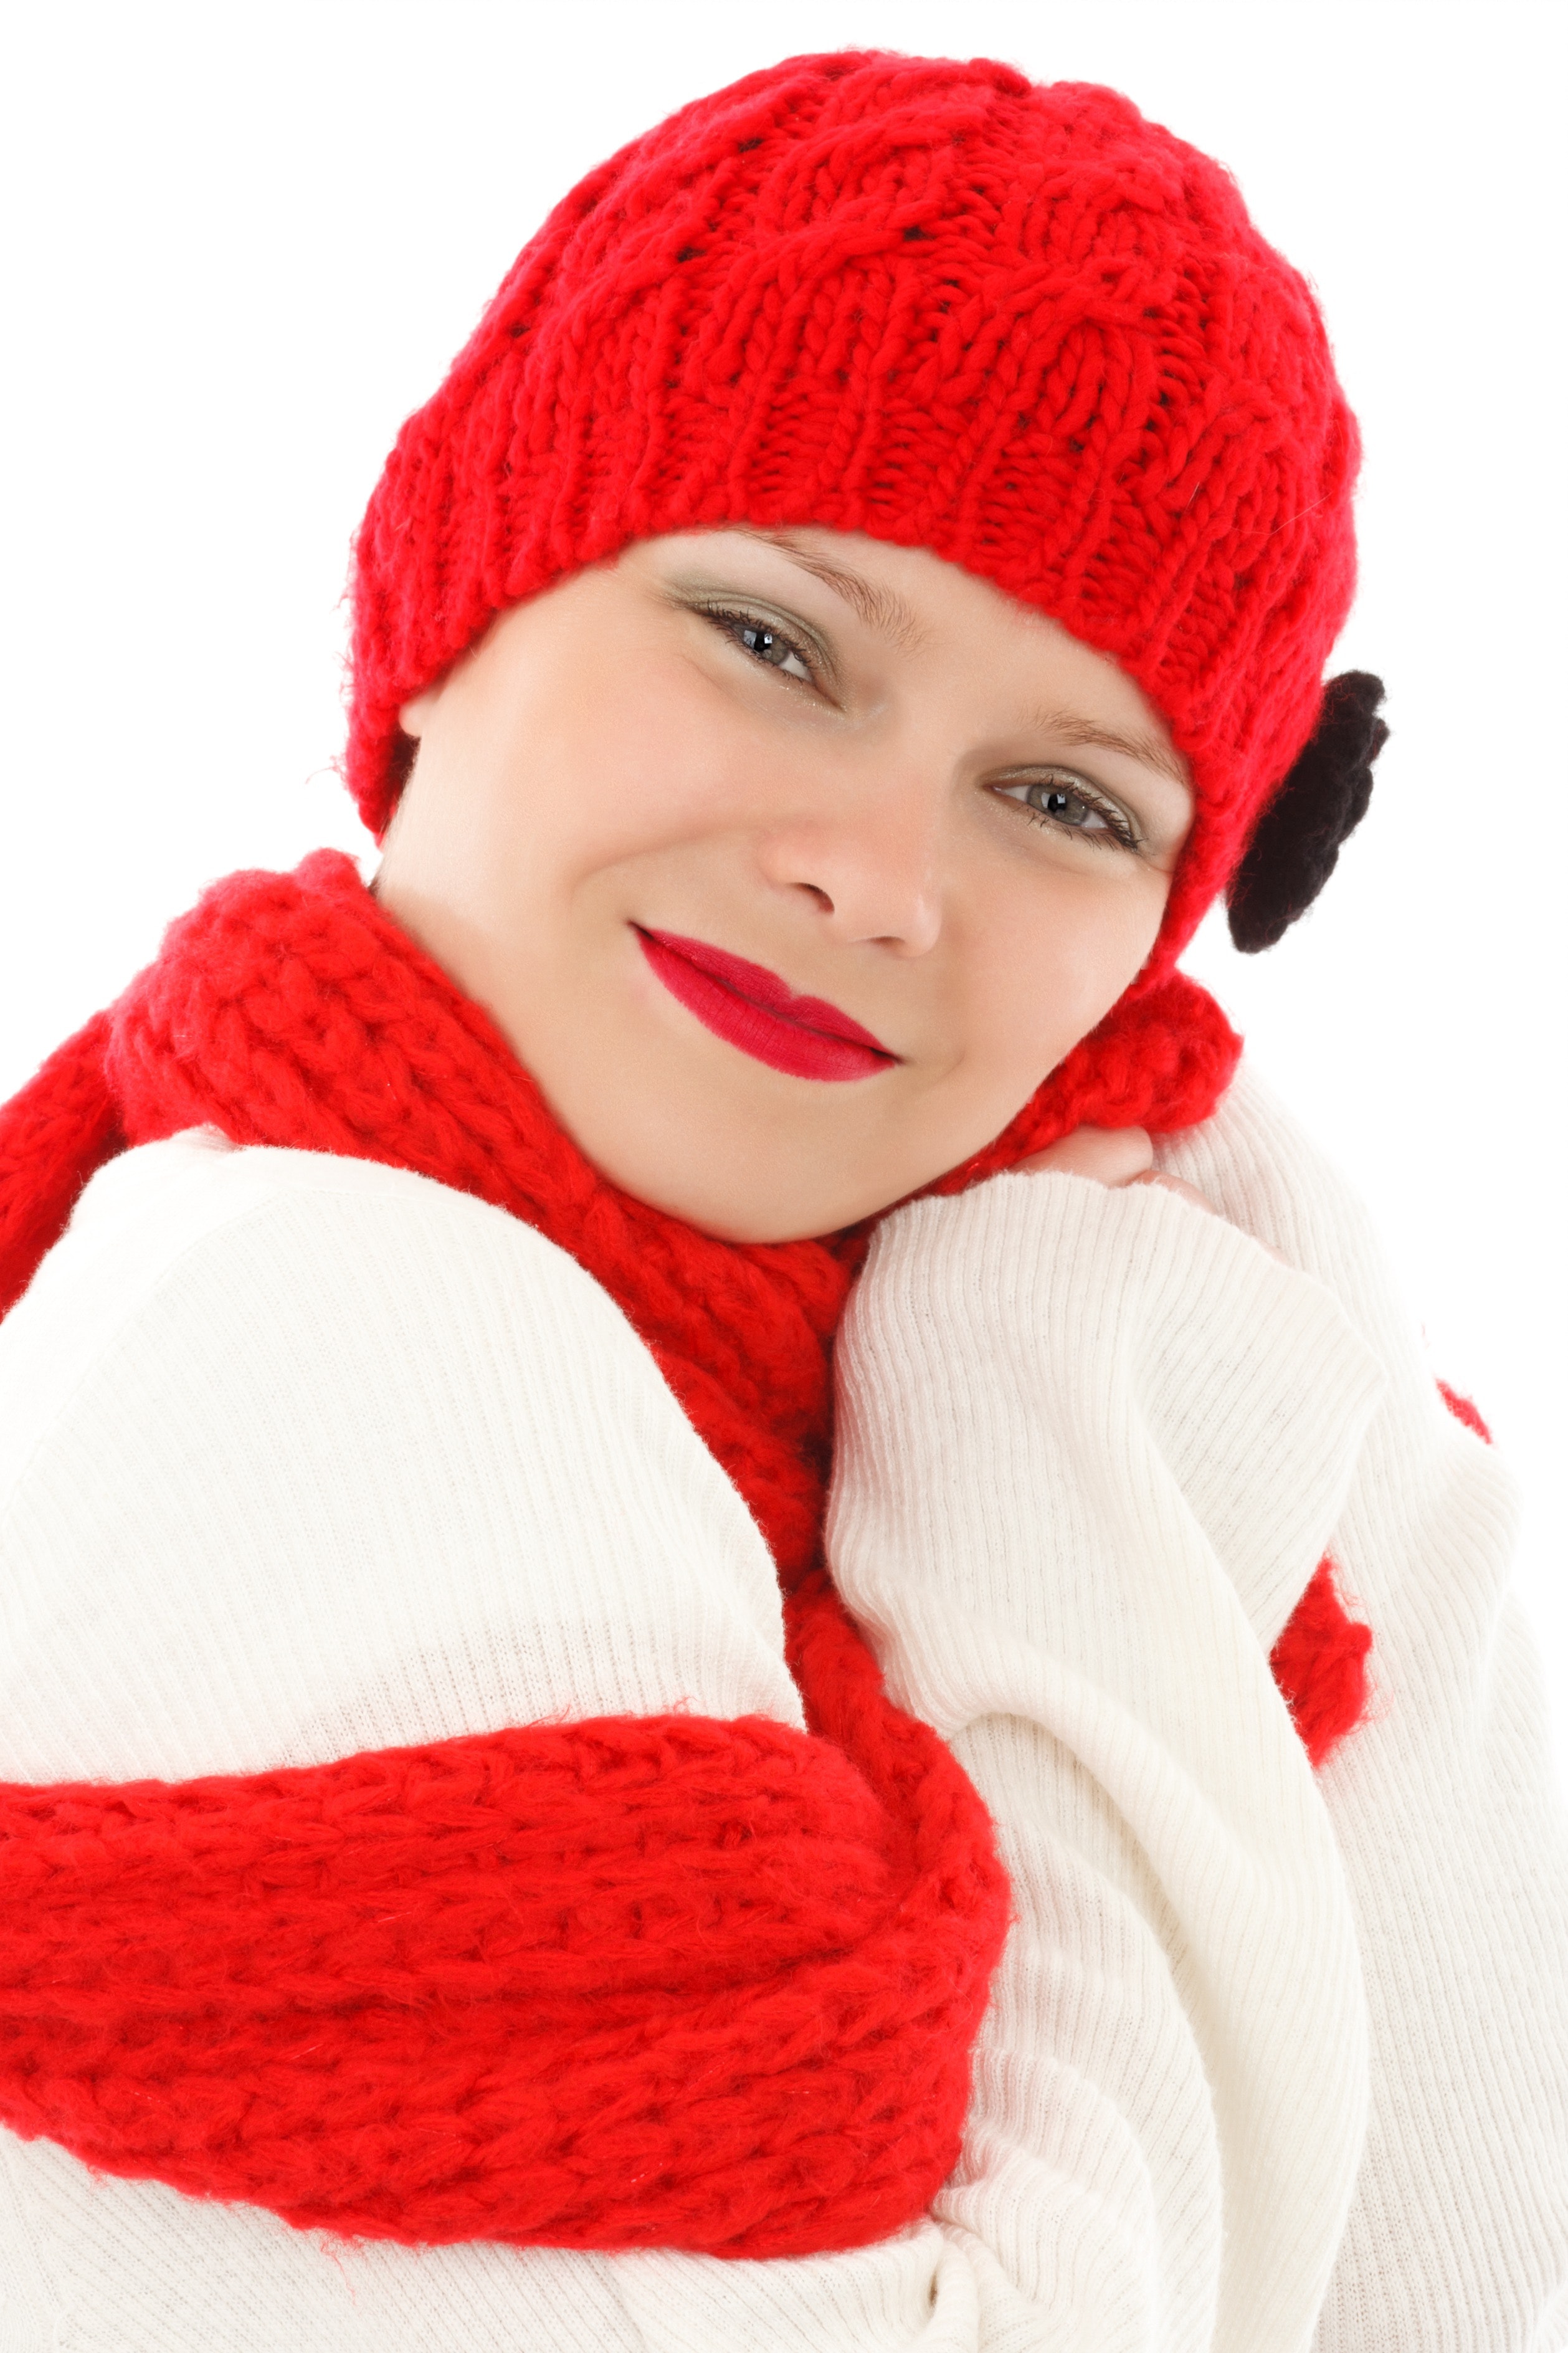 Woman wearing red snow cap photo